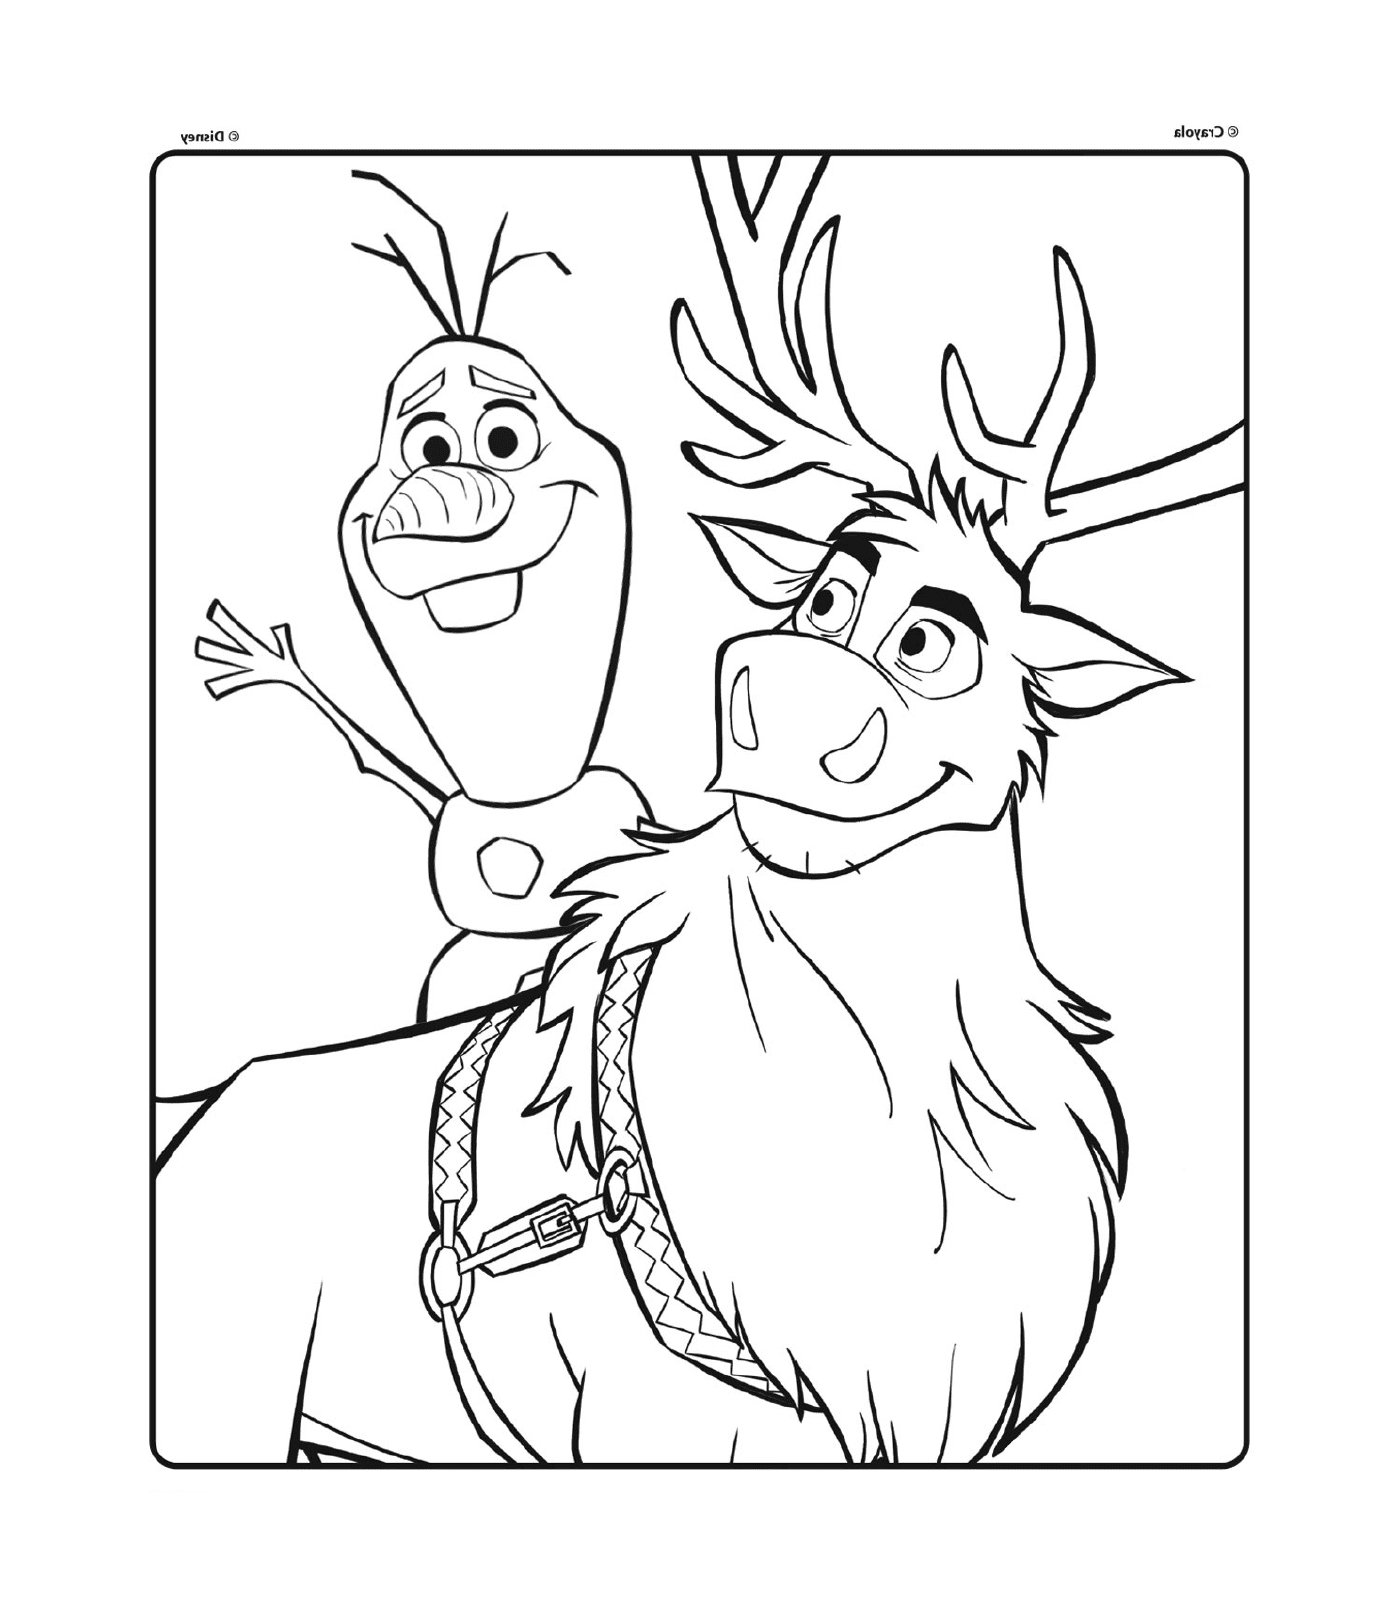  Olaf and Sven from Disney The Snow Queen 2 